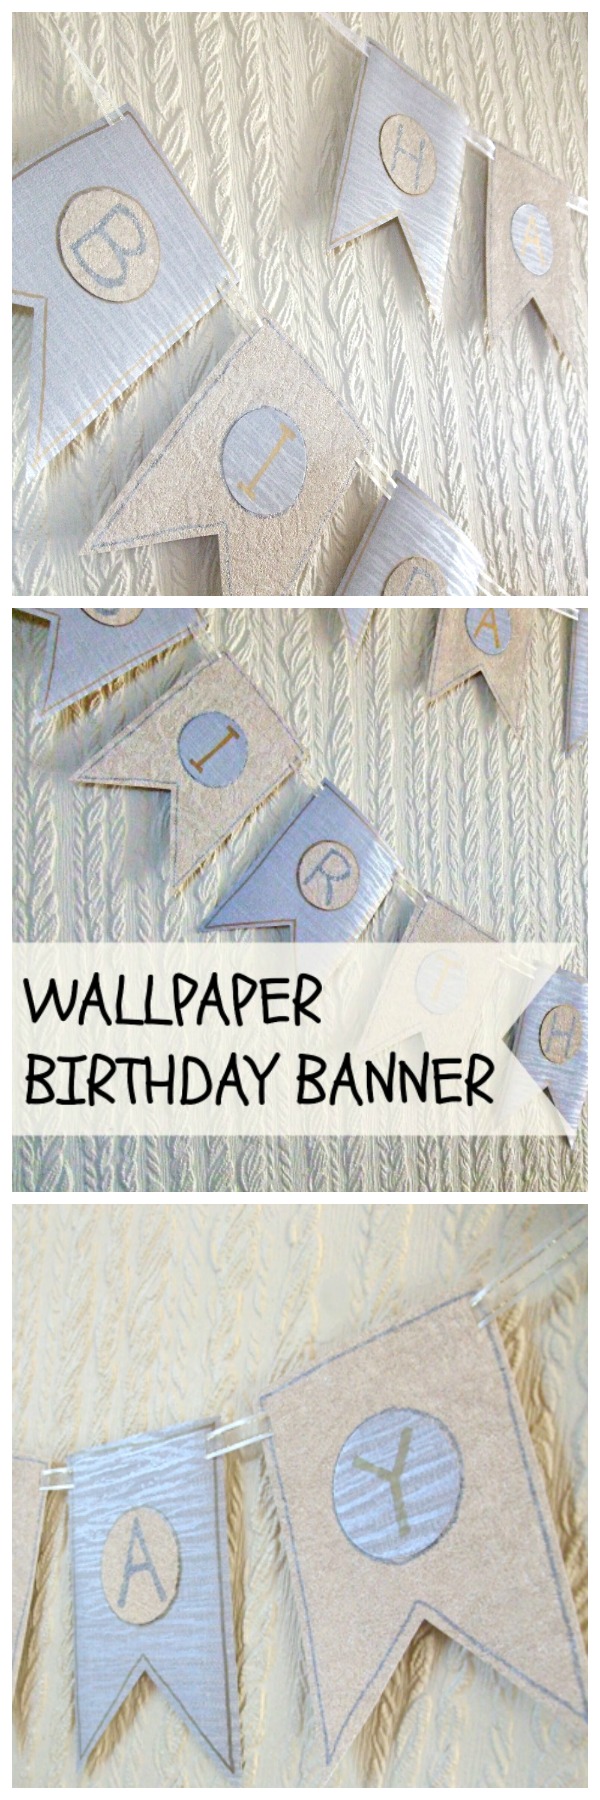 how to make a wallpaper birthday banner